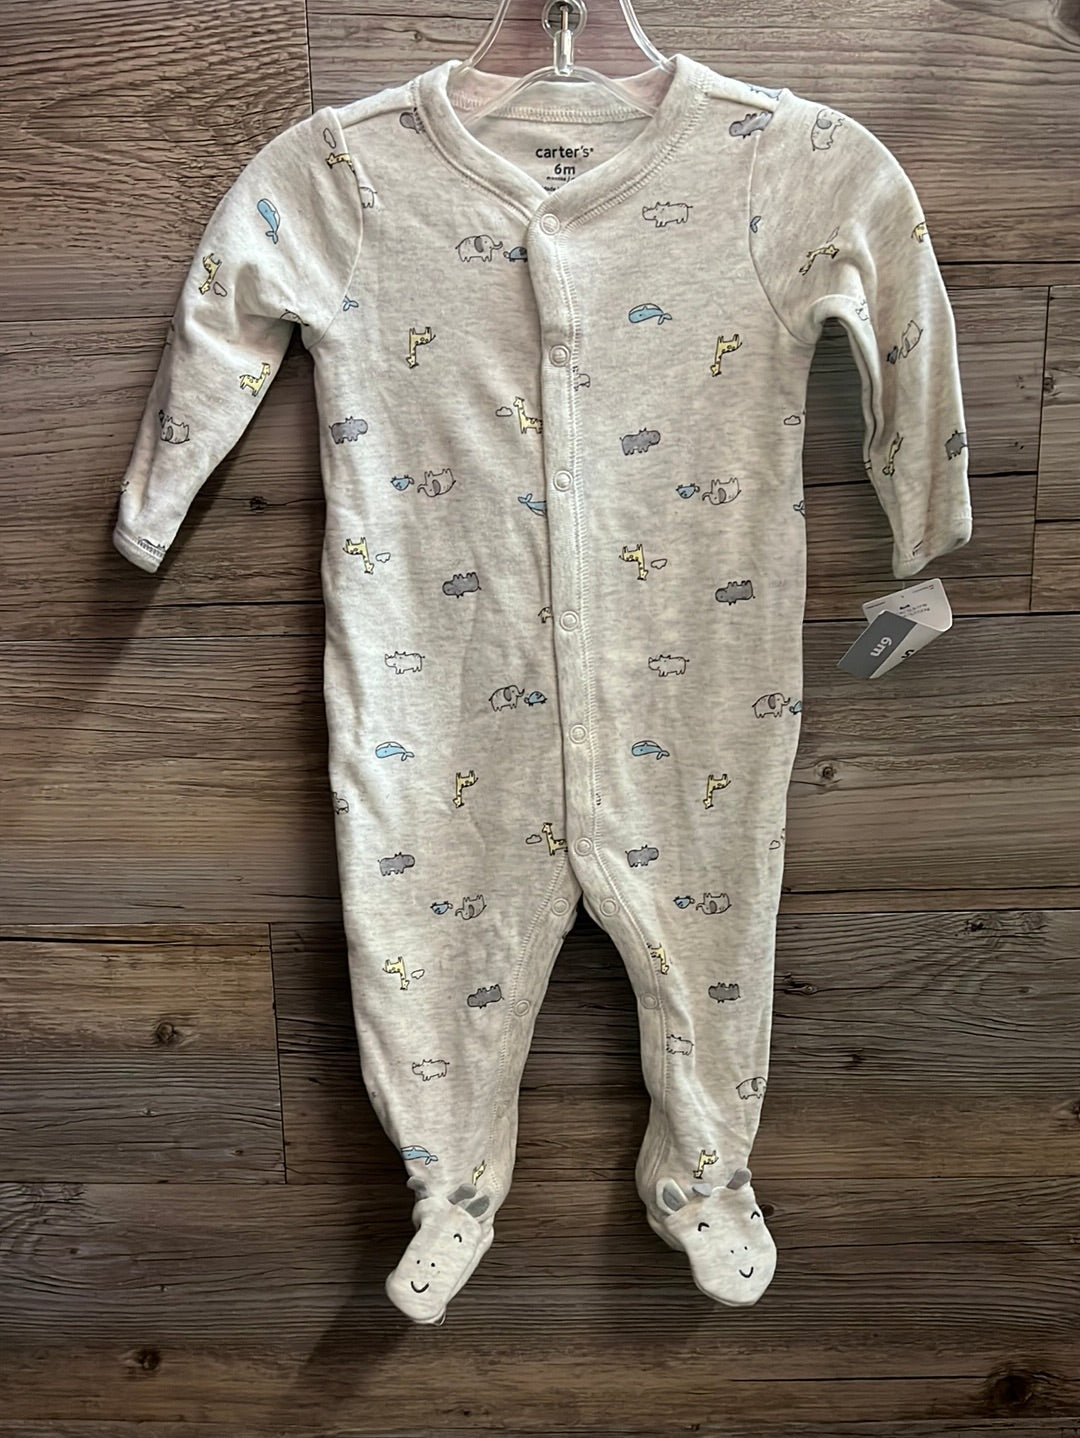 New Carter's Coverall, Size 3-6M